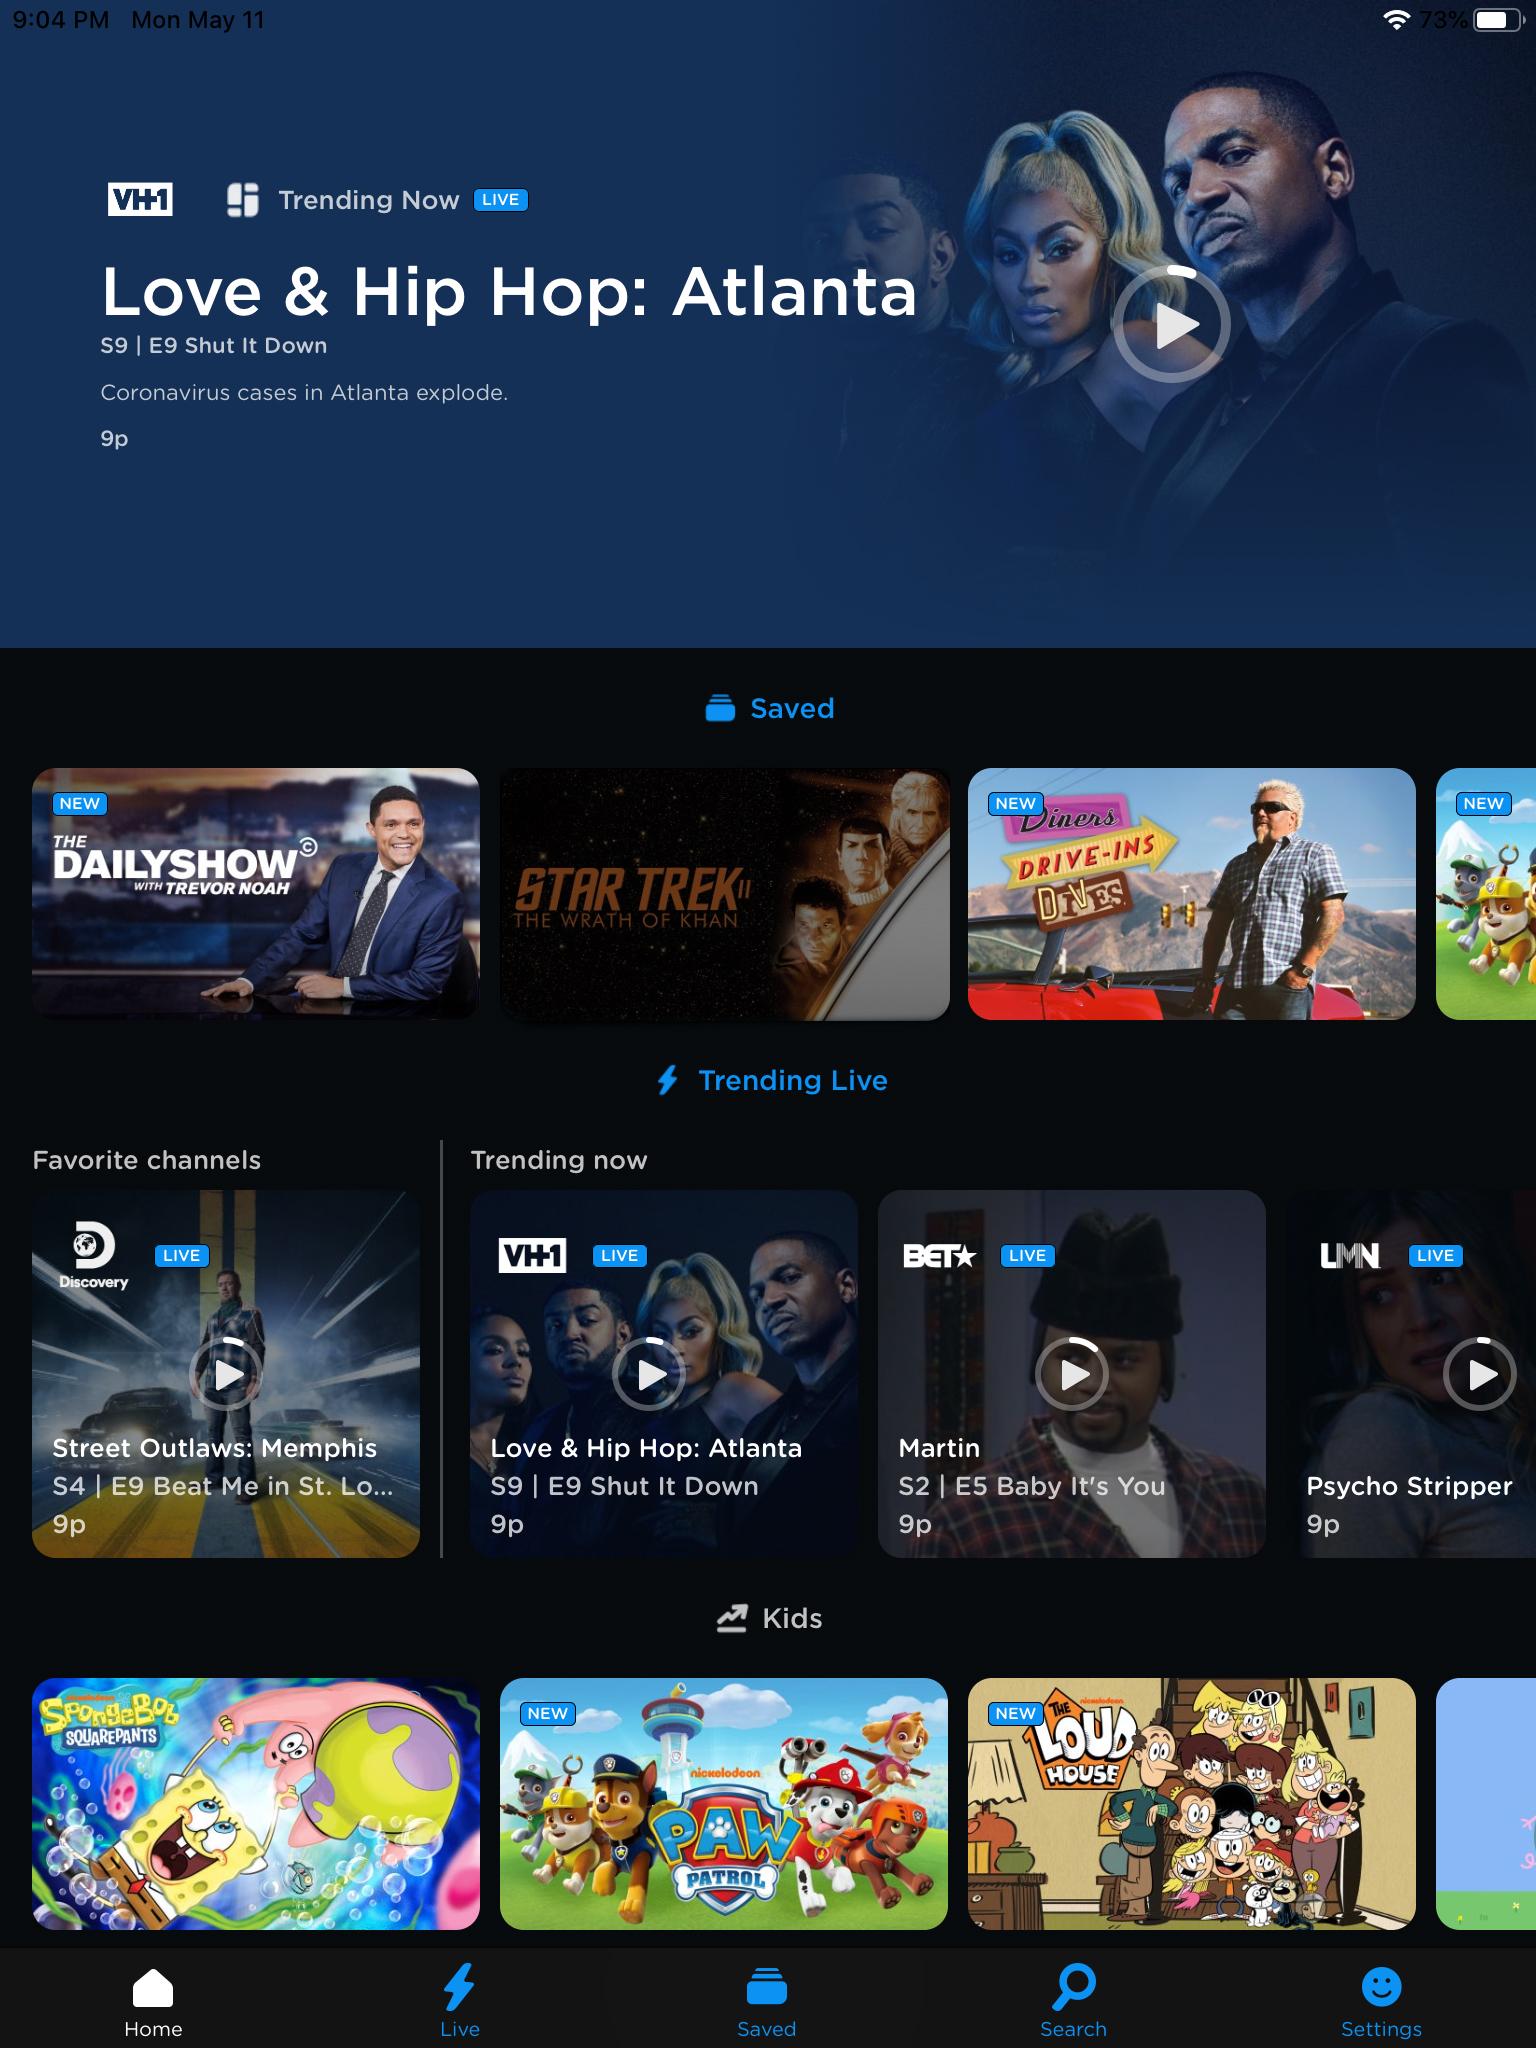 'Screenshot, Philo Home Screen with "Love & Hip Hop" featured on iPad'